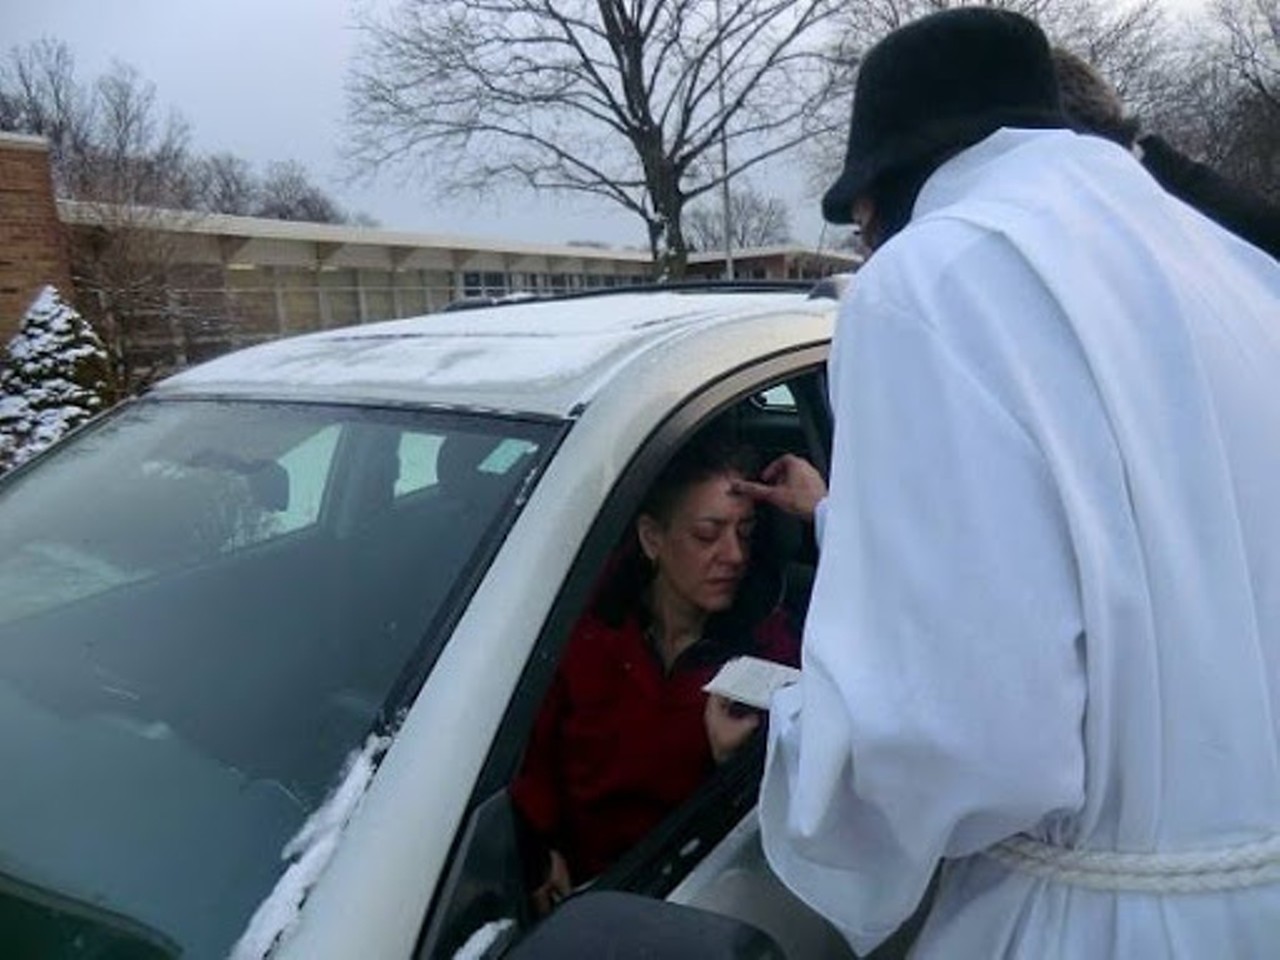 Drive-thru Ash Wednesday
This is pretty much the most Michigan thing ever. St. Dave&#146;s Episcopal Church in Southfield makes it easier for Christians to receive their annual forehead smudge for Ash Wednesday. The drive-thru is accessible from 12 Mile Road, and motorists can enter from one of two driveways to receive their ashes, and then exit back onto 12 Mile Road.
Photo courtesy of St. Dave&#146;s Episcopal Church